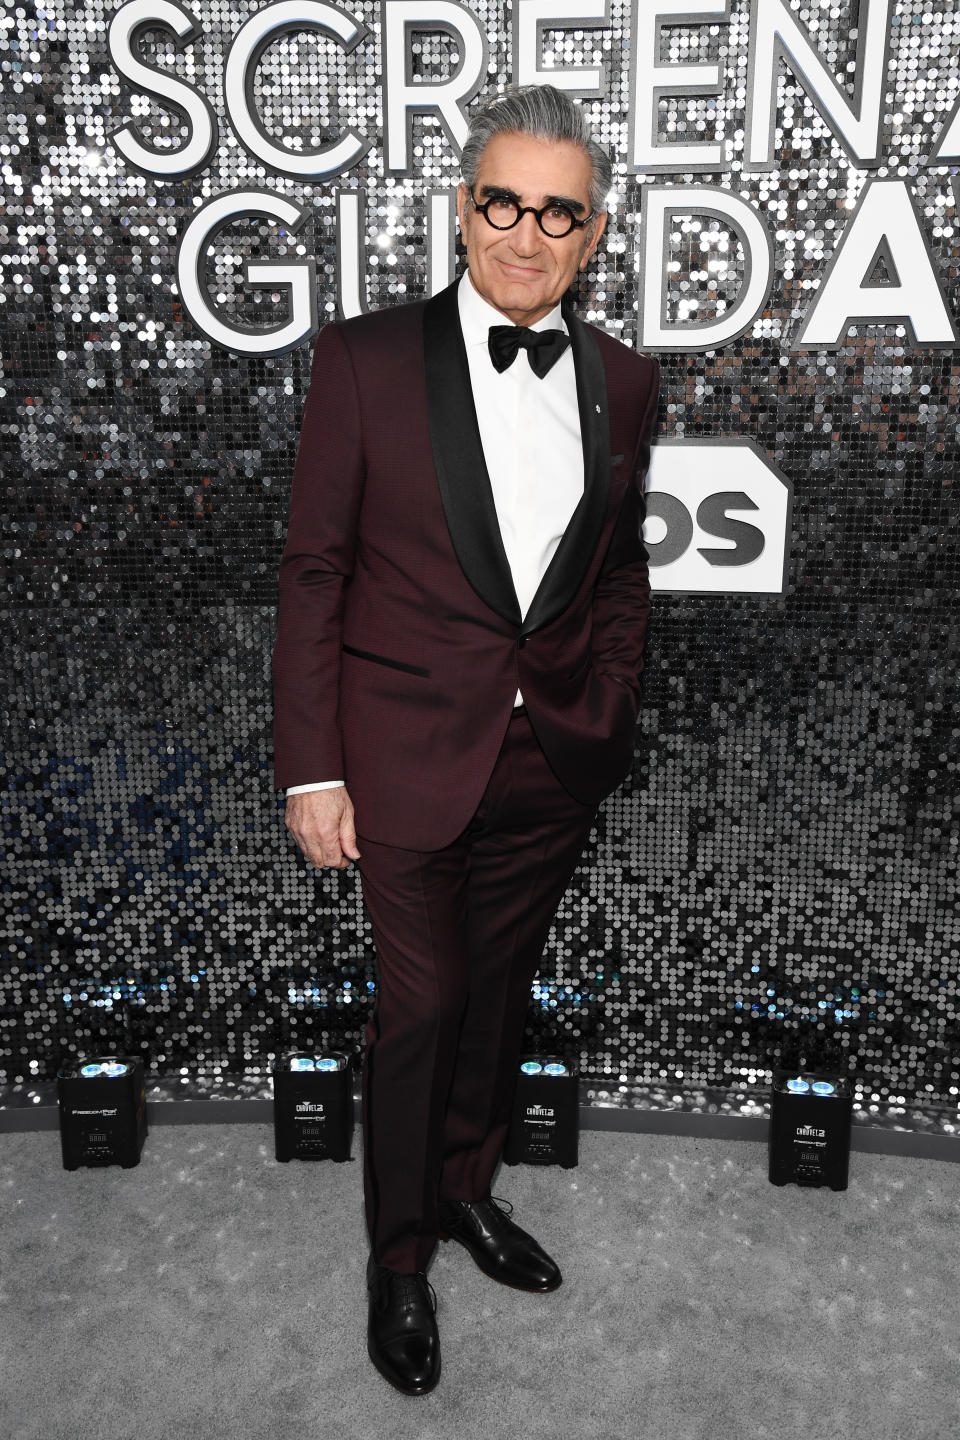 LOS ANGELES, CALIFORNIA - JANUARY 19: Eugene Levy attends the 26th Annual Screen Actors Guild Awards at The Shrine Auditorium on January 19, 2020 in Los Angeles, California. 721336 (Photo by Kevin Mazur/Getty Images for Turner)